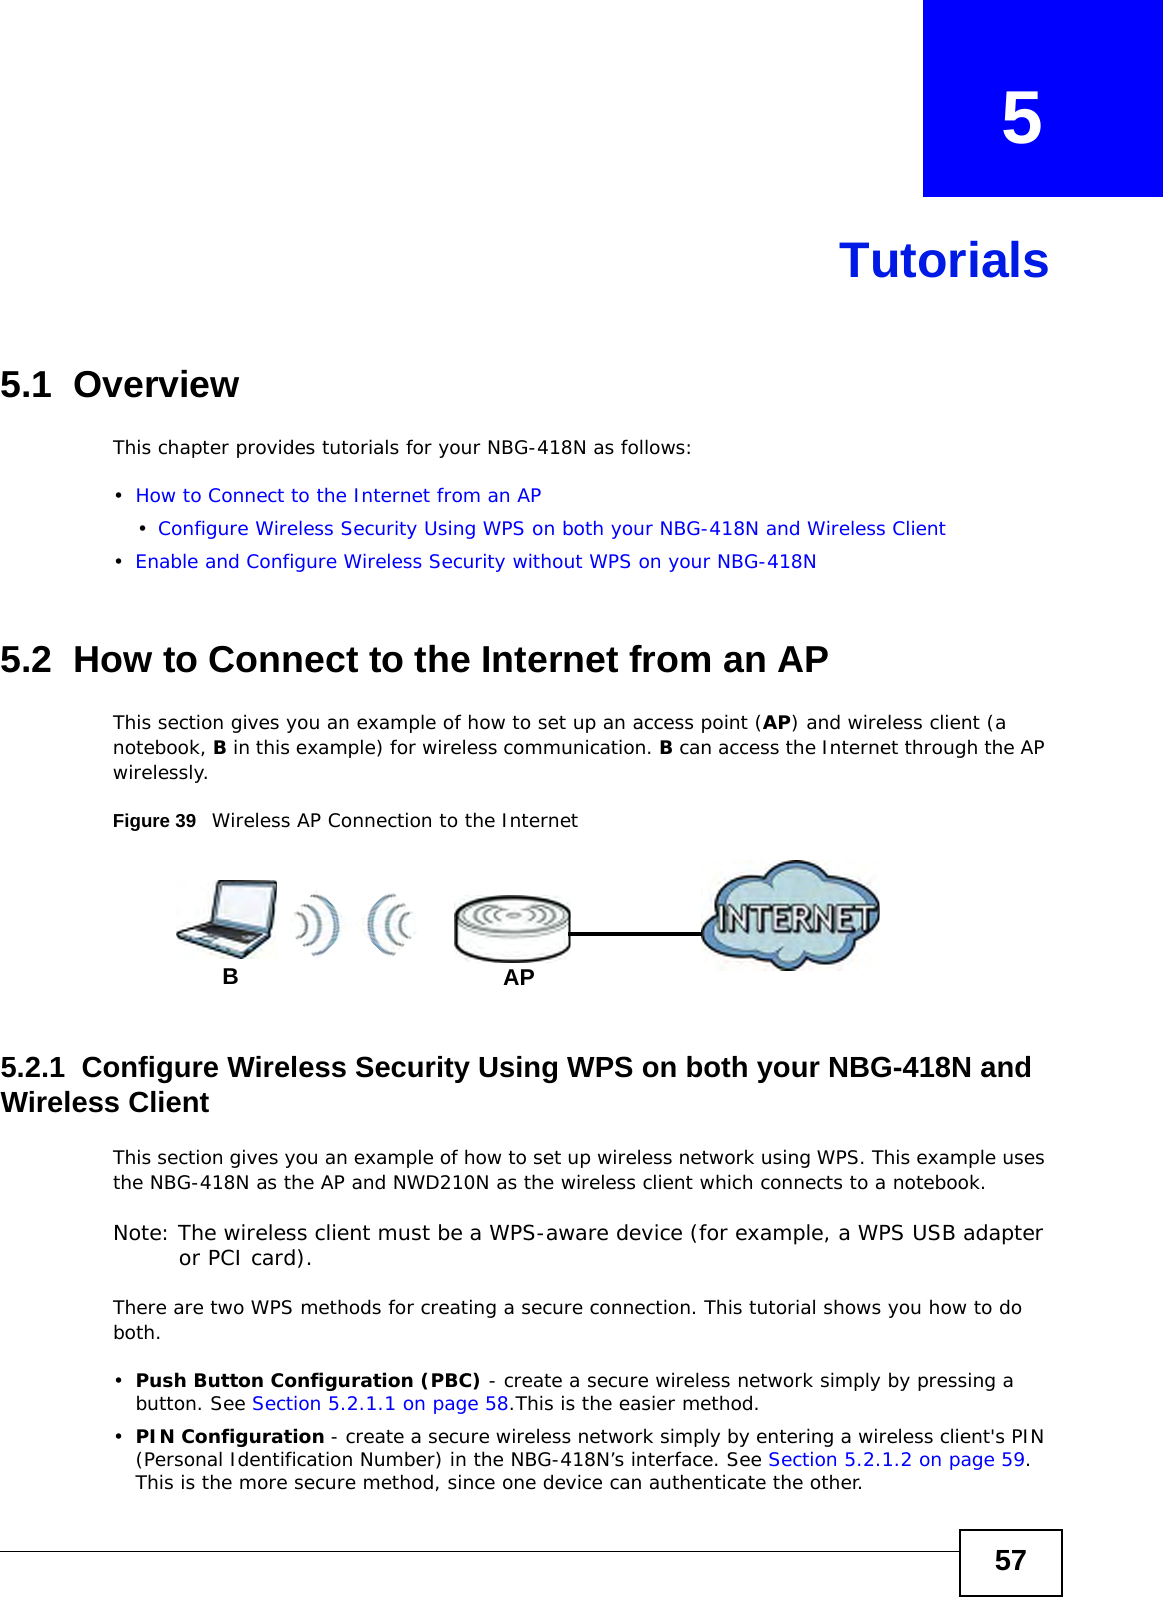 57CHAPTER   5Tutorials5.1  OverviewThis chapter provides tutorials for your NBG-418N as follows:•How to Connect to the Internet from an AP•Configure Wireless Security Using WPS on both your NBG-418N and Wireless Client•Enable and Configure Wireless Security without WPS on your NBG-418N5.2  How to Connect to the Internet from an APThis section gives you an example of how to set up an access point (AP) and wireless client (a notebook, B in this example) for wireless communication. B can access the Internet through the AP wirelessly.Figure 39   Wireless AP Connection to the Internet5.2.1  Configure Wireless Security Using WPS on both your NBG-418N and Wireless ClientThis section gives you an example of how to set up wireless network using WPS. This example uses the NBG-418N as the AP and NWD210N as the wireless client which connects to a notebook. Note: The wireless client must be a WPS-aware device (for example, a WPS USB adapter or PCI card).There are two WPS methods for creating a secure connection. This tutorial shows you how to do both.•Push Button Configuration (PBC) - create a secure wireless network simply by pressing a button. See Section 5.2.1.1 on page 58.This is the easier method.•PIN Configuration - create a secure wireless network simply by entering a wireless client&apos;s PIN (Personal Identification Number) in the NBG-418N’s interface. See Section 5.2.1.2 on page 59. This is the more secure method, since one device can authenticate the other.APB